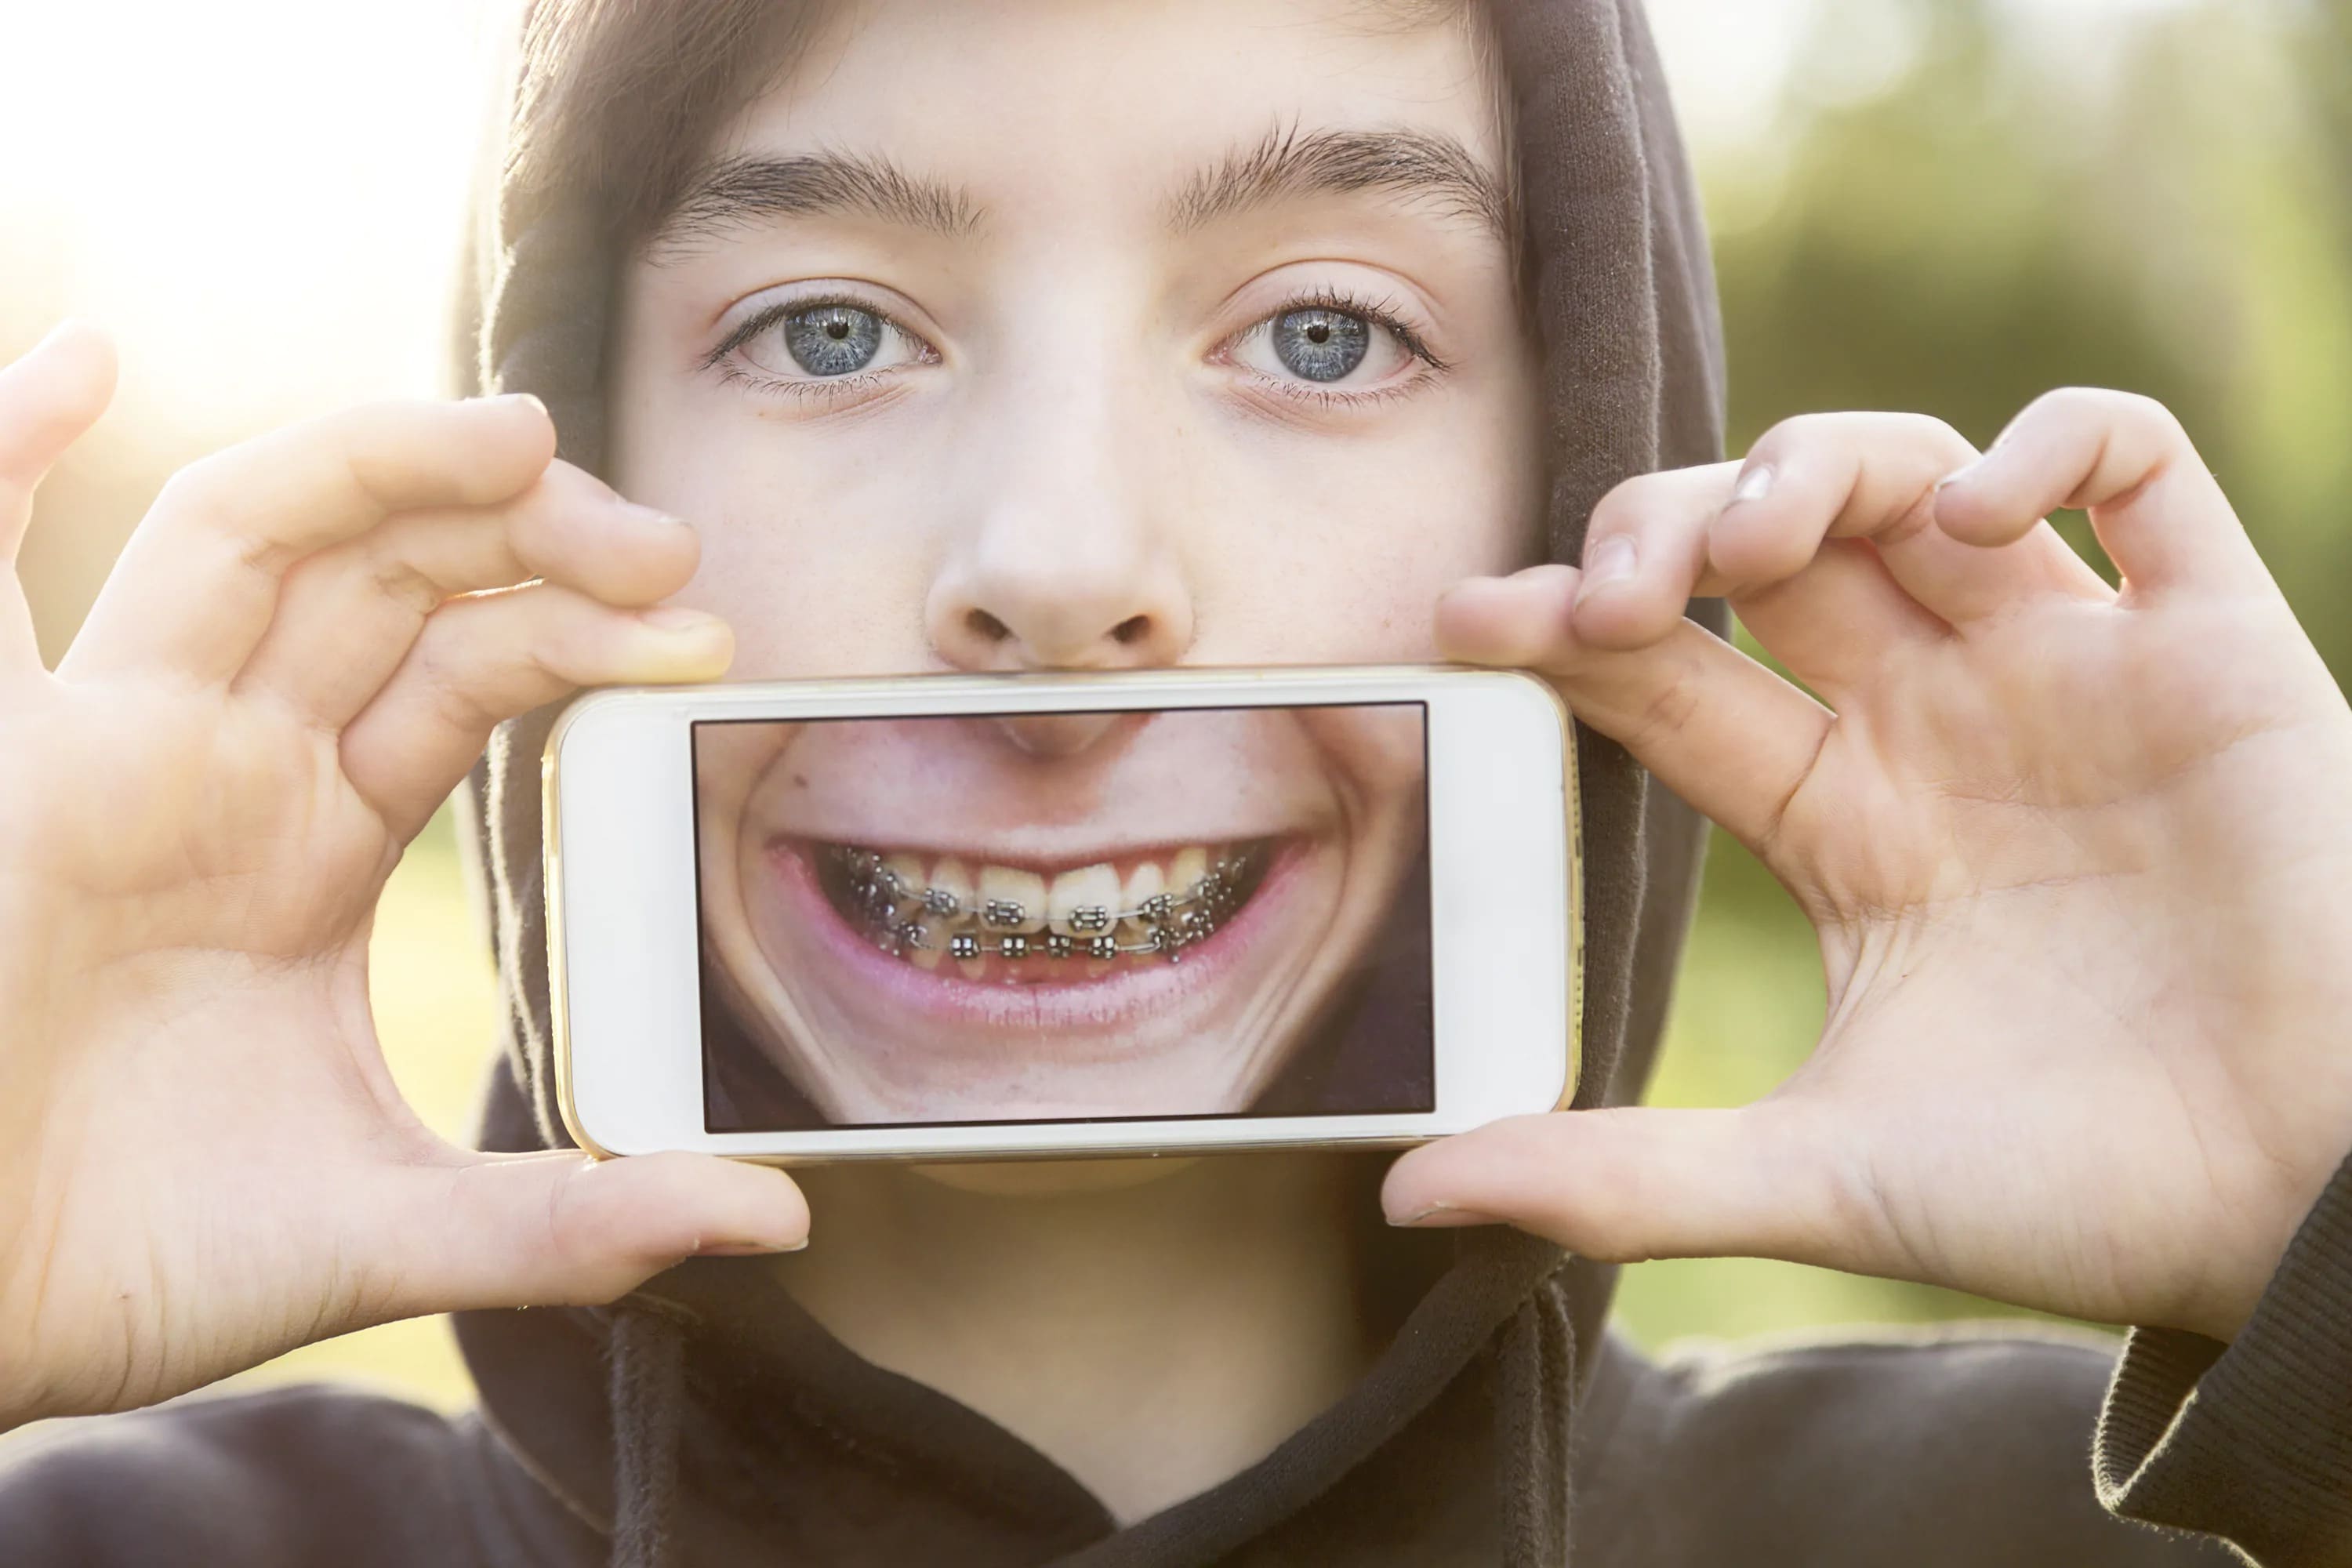 A person showing their smile with braces on a cellphone